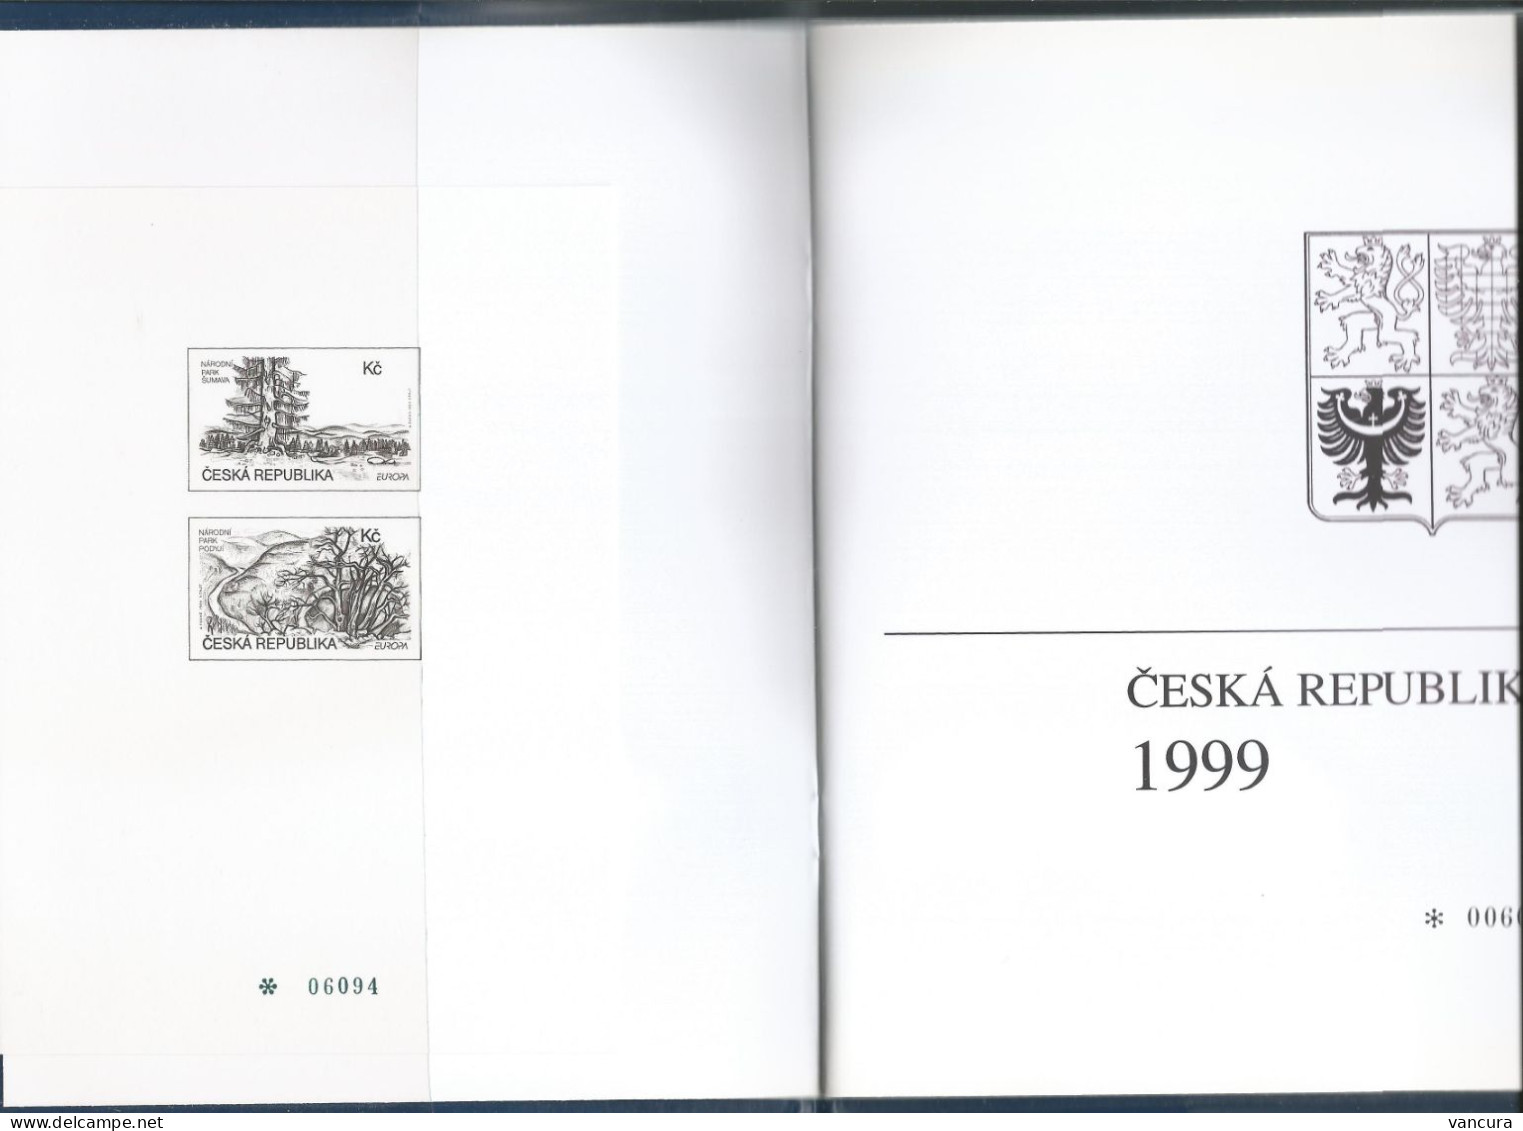 Czech Republic Year Book 1999 (with Blackprint) - Annate Complete